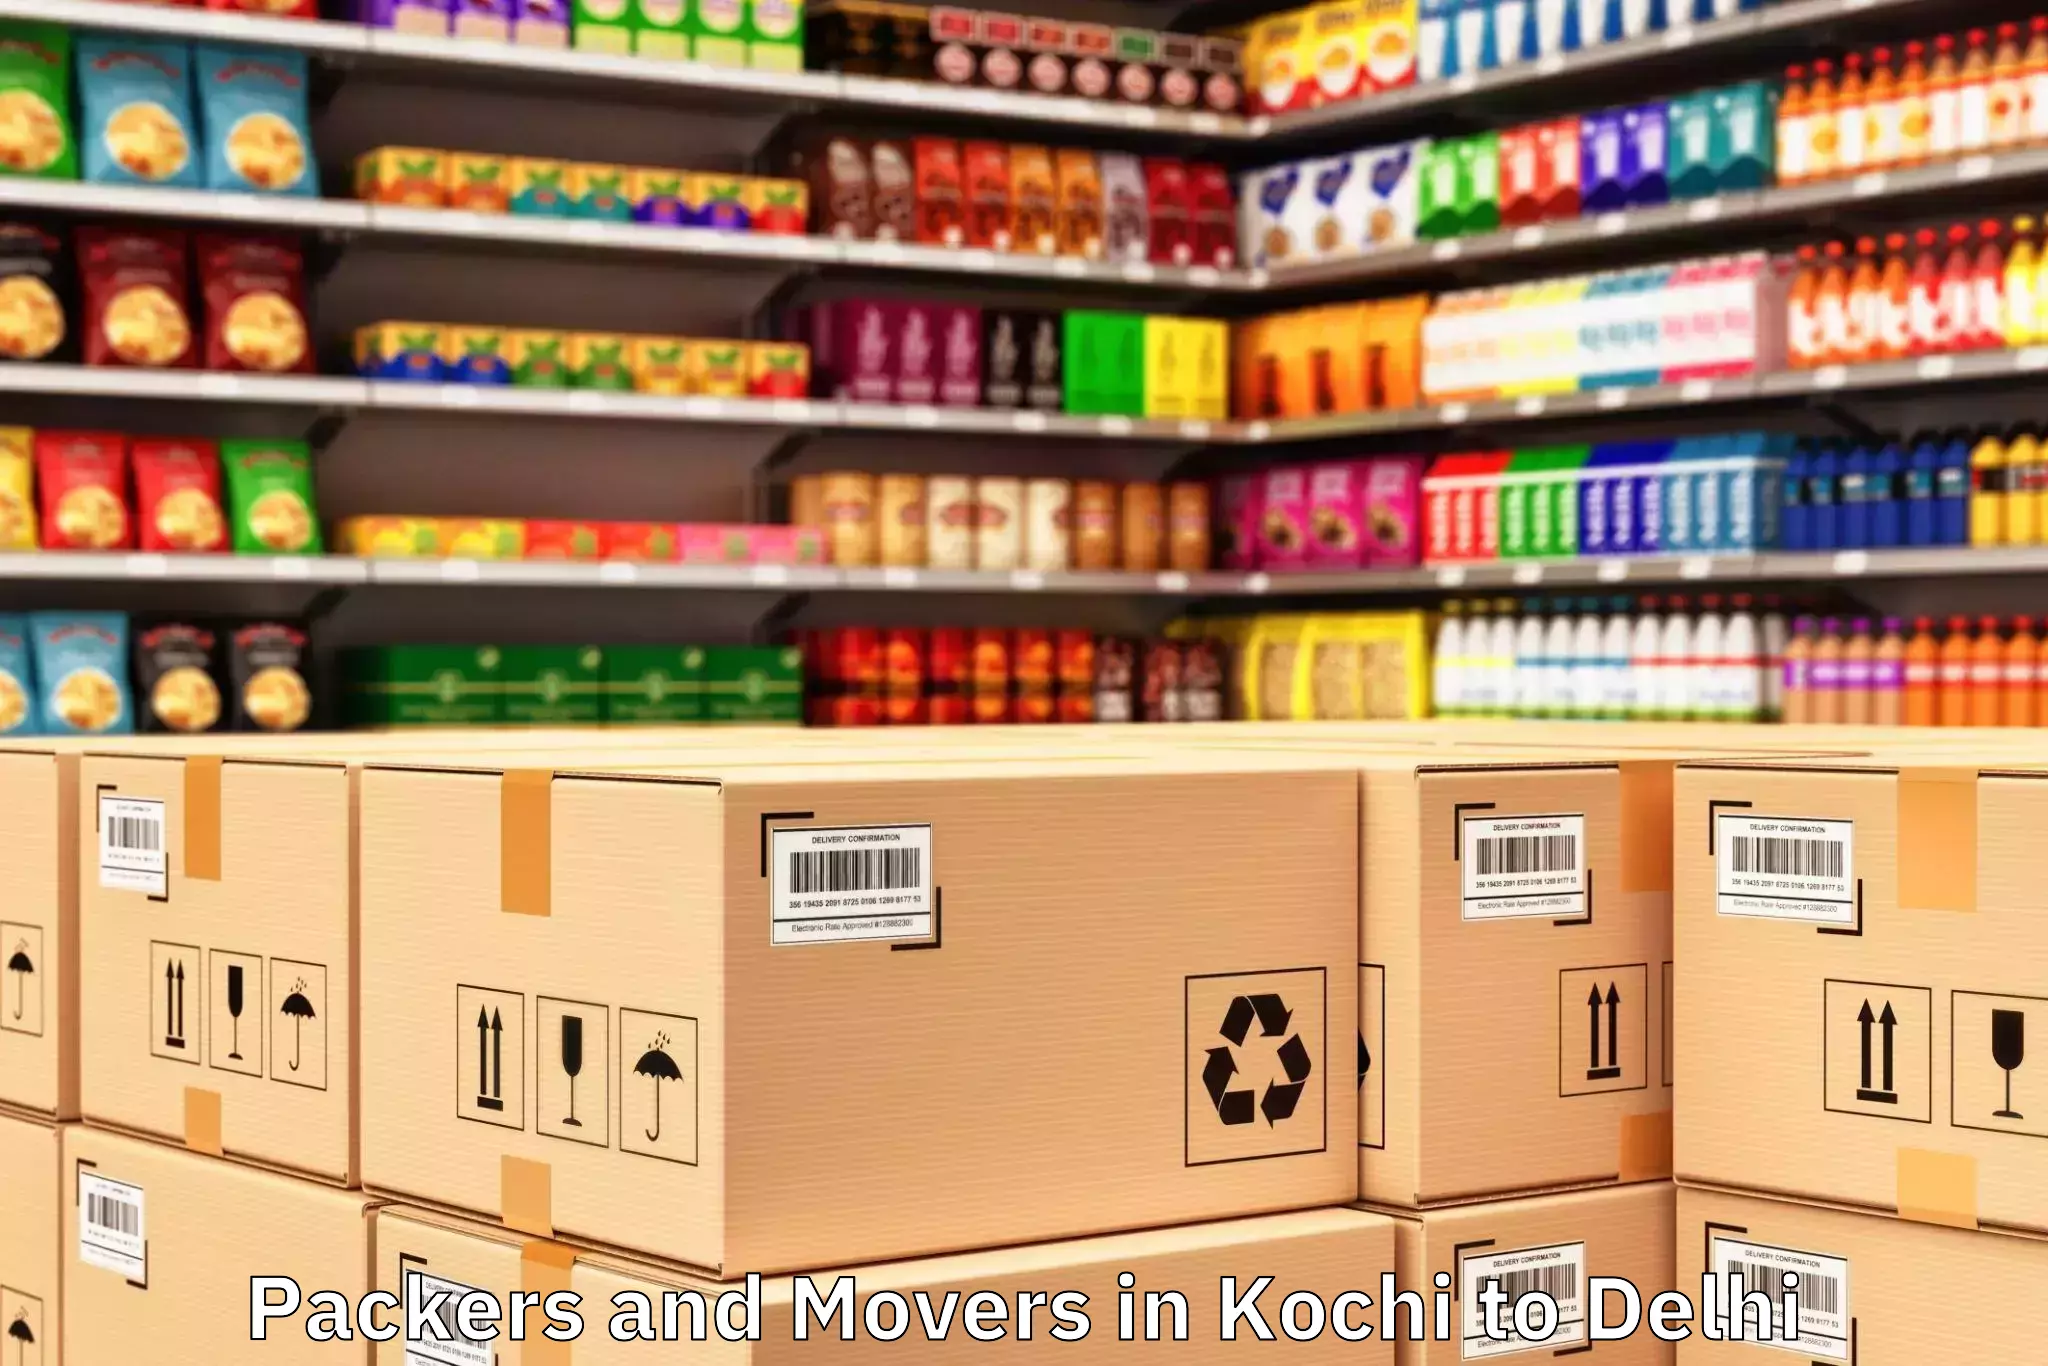 Professional Kochi to Functional Industrial Estate For Electronics Packers And Movers